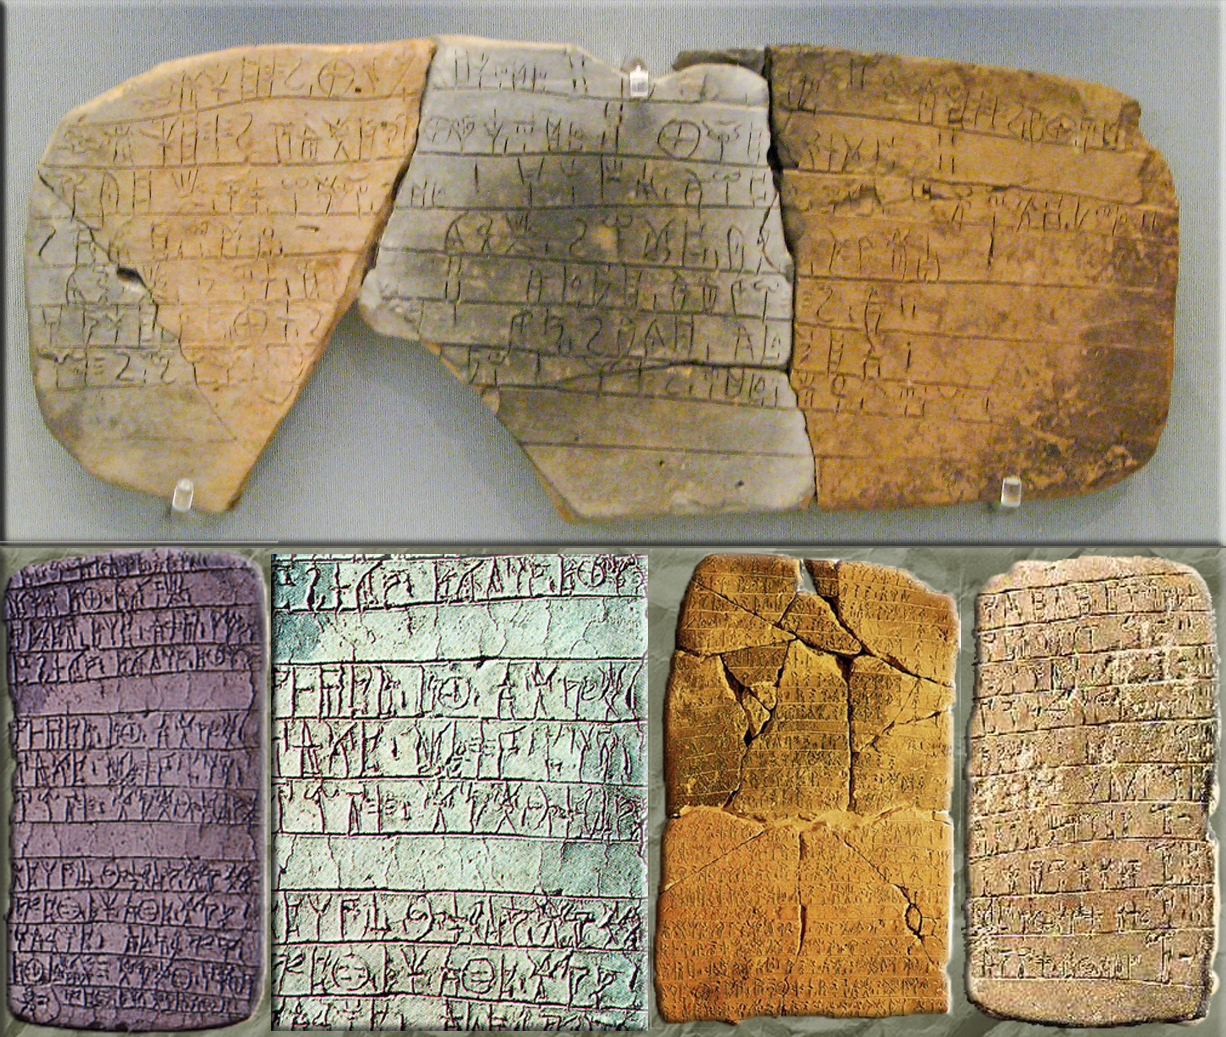 Archaeologists in Knossos, Crete, discover a large cache of clay tablets with hieroglyphic writing in a script they call Linear B